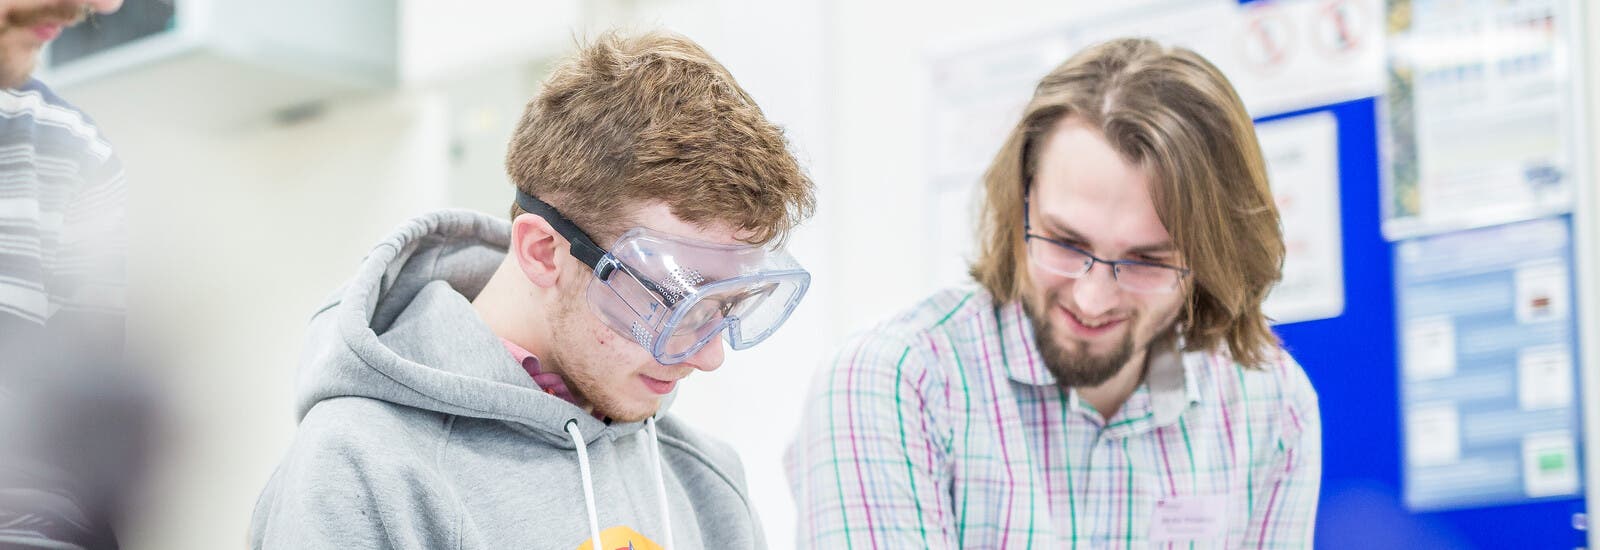 Science students in lab wearing goggles